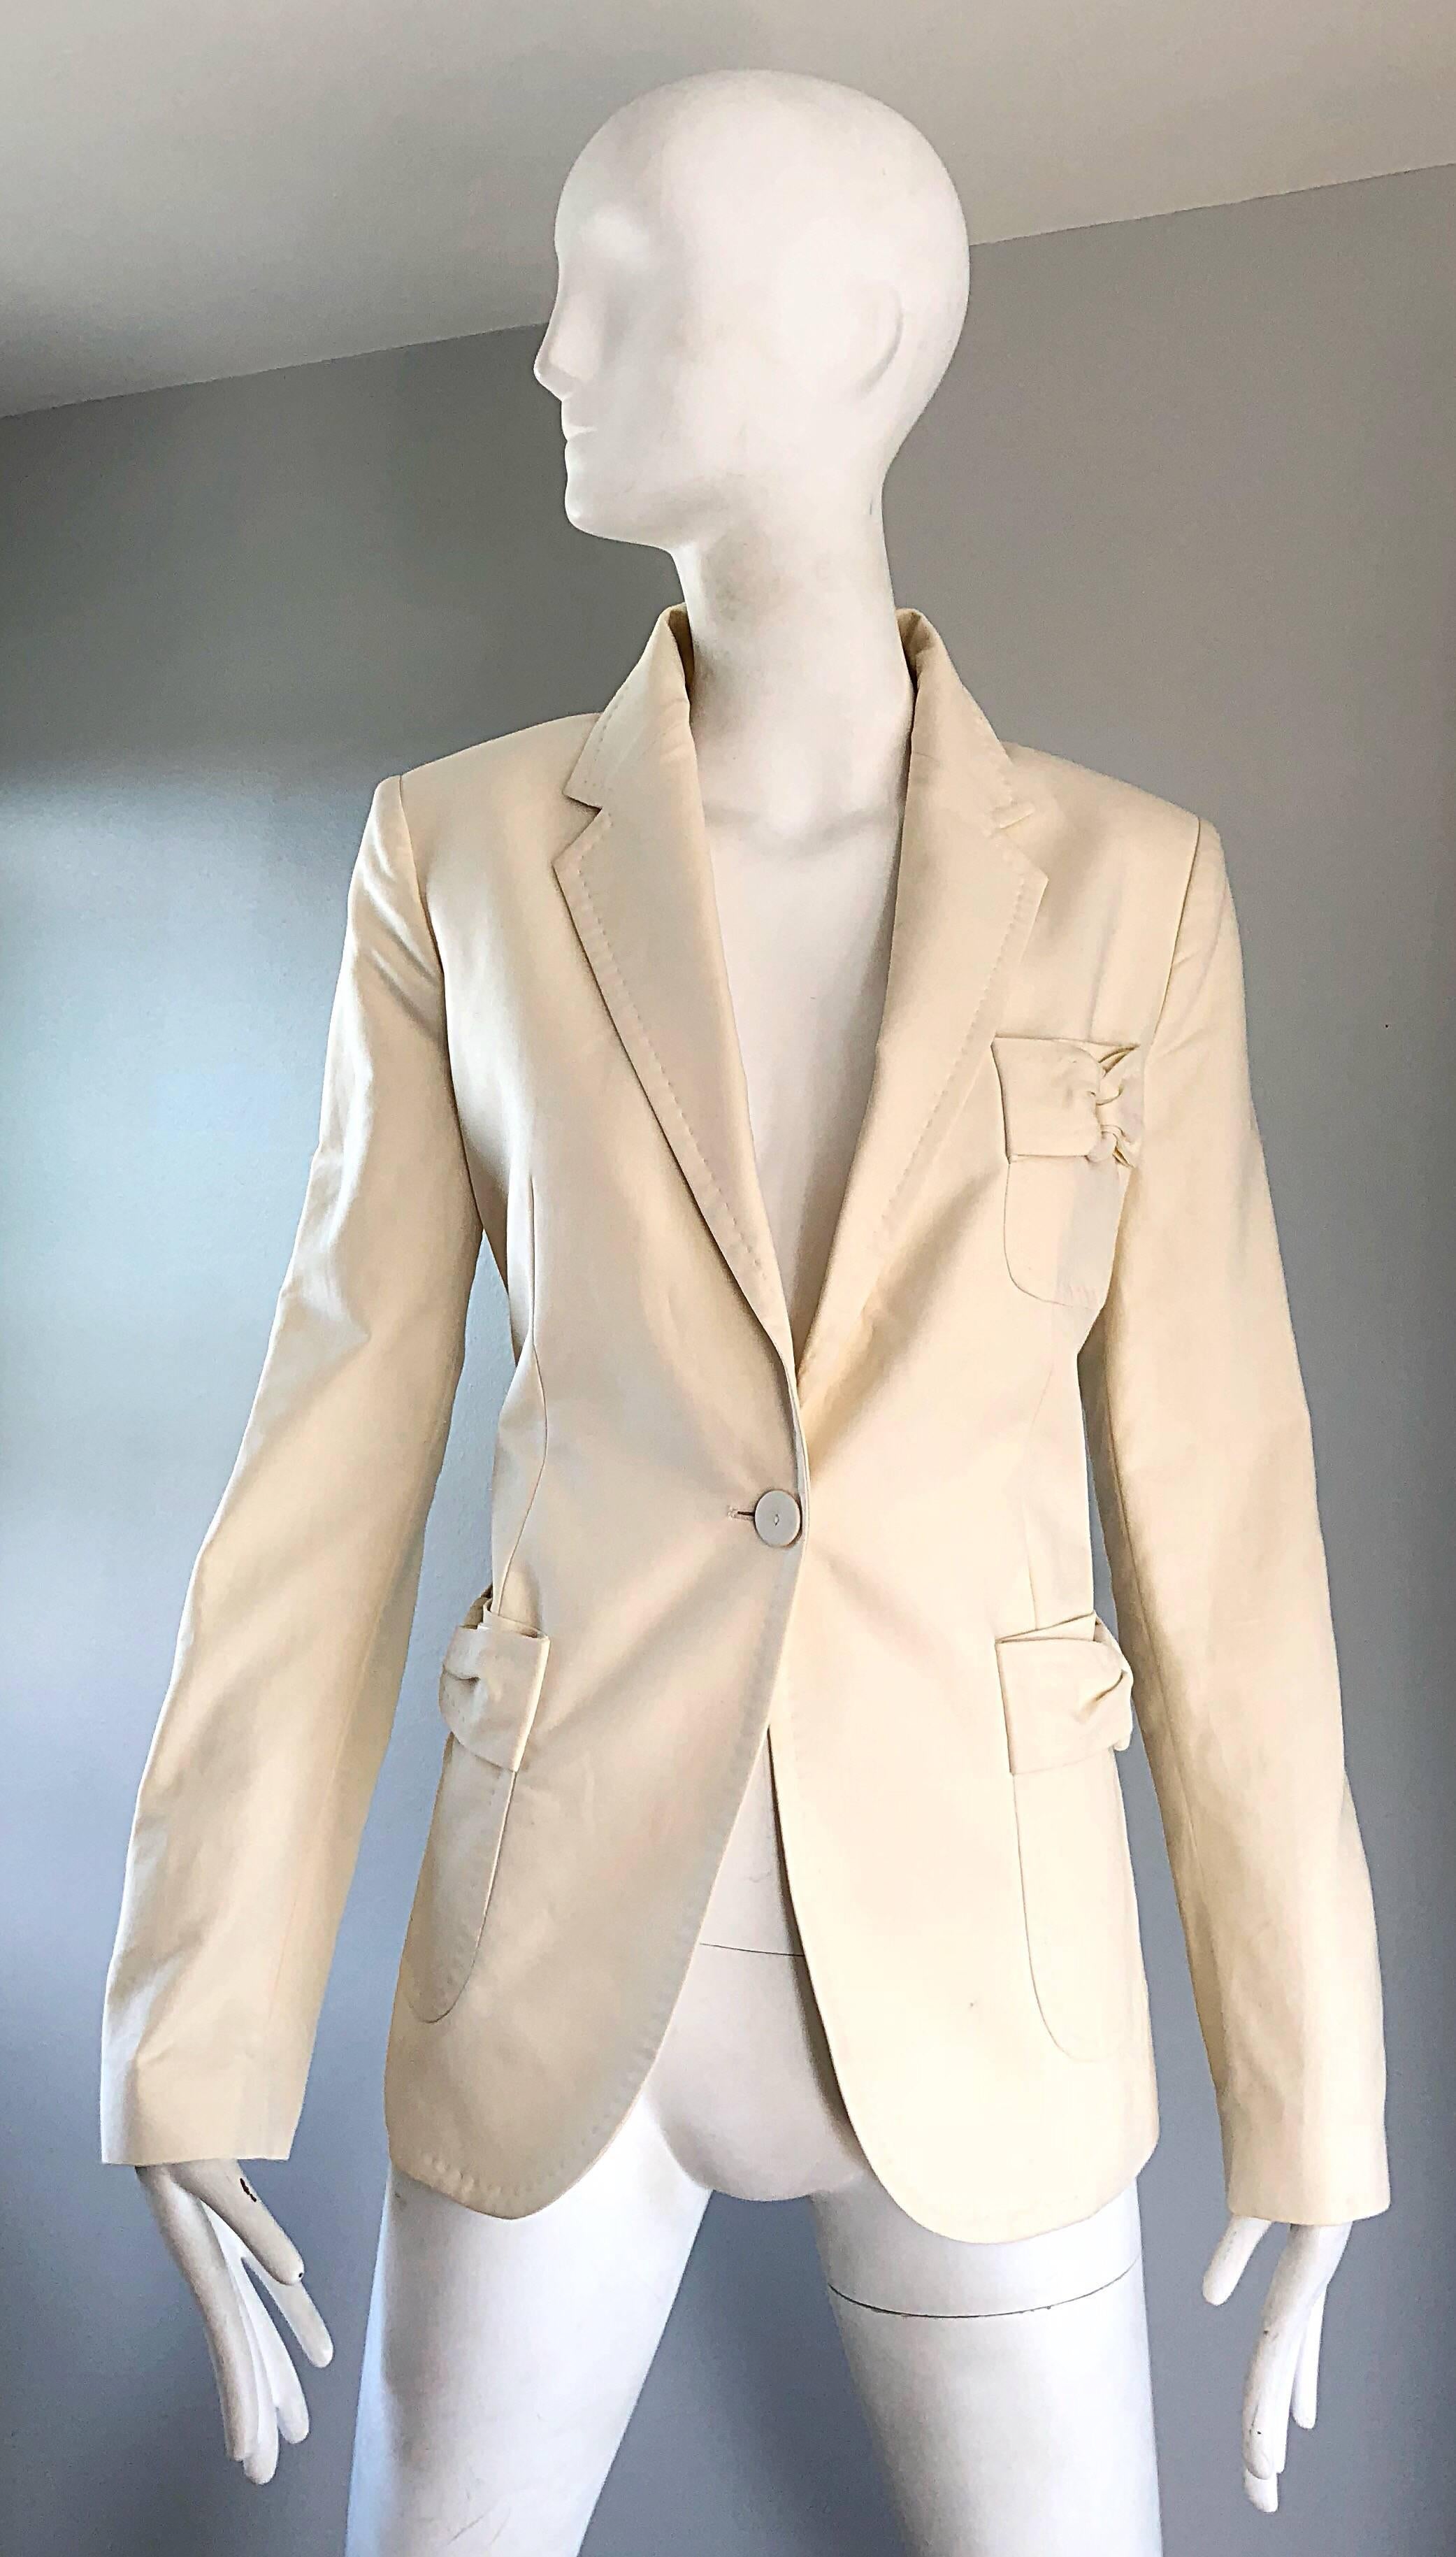 Chic brand new vintage 1990s VIKTOR and ROLF ivory cotton blazer jacket! Features a smart tailored fit, with Avant Garde 'loops' on each waist pocket, and on the breast pocket. Single button closure. Fully lined, with interior pockets. Great fit,